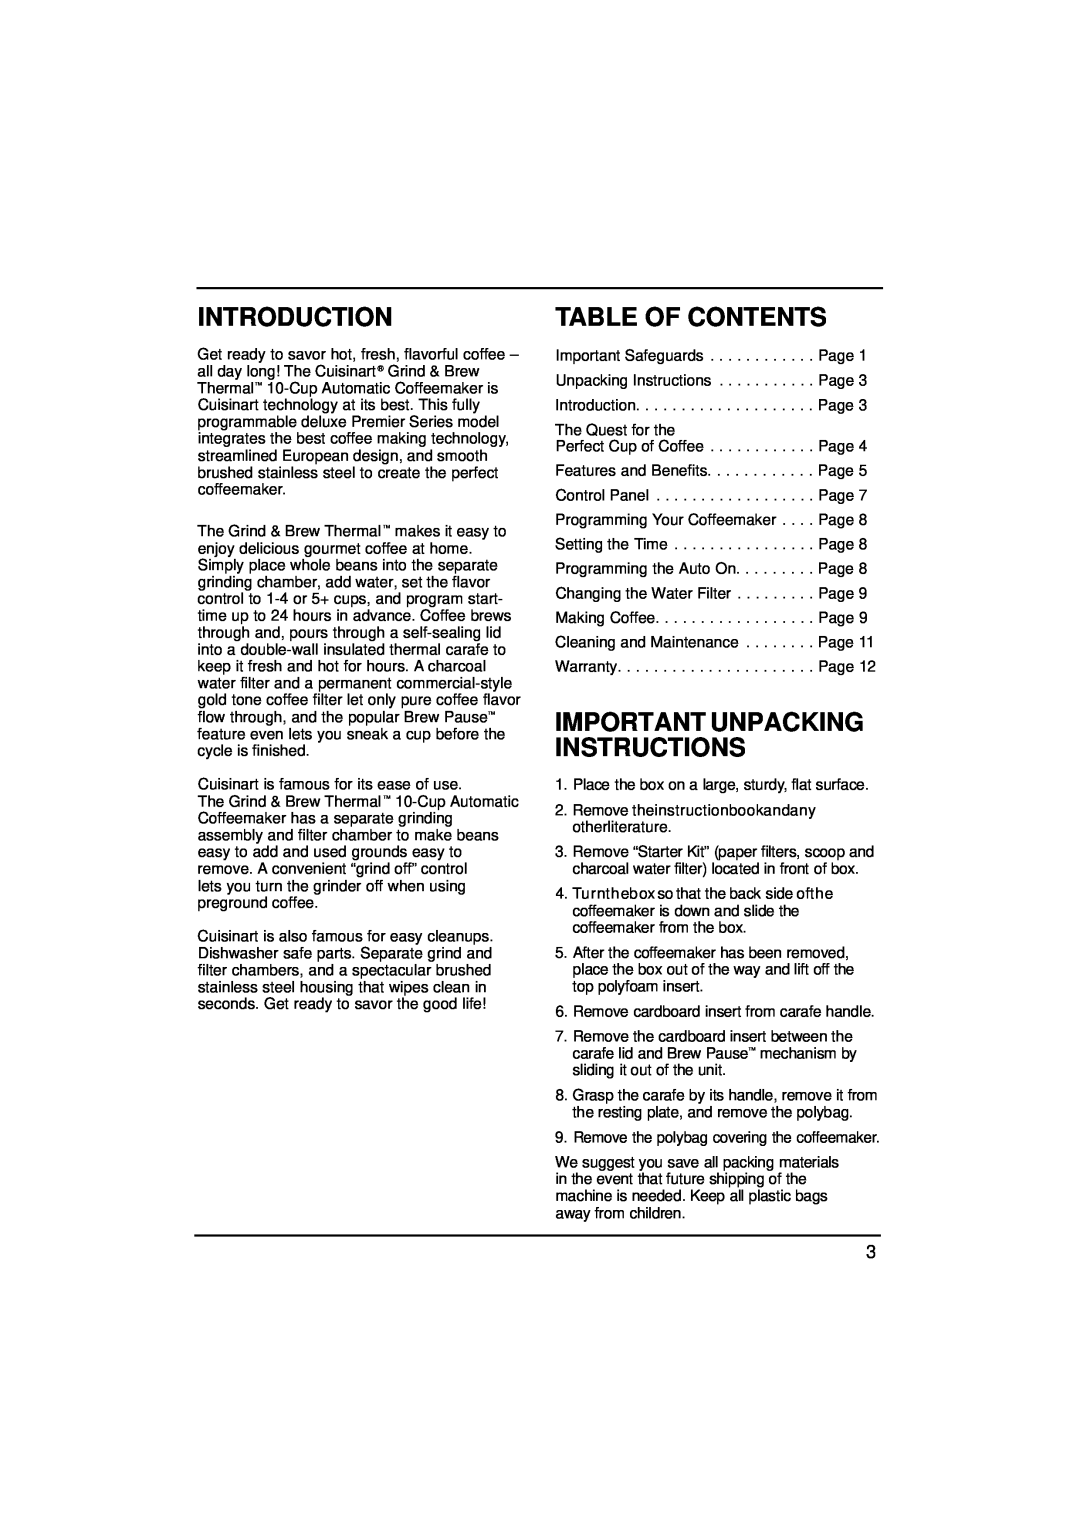 Cuisinart DGB-600BC manual Introduction, Table Of Contents, Important Unpacking Instructions 